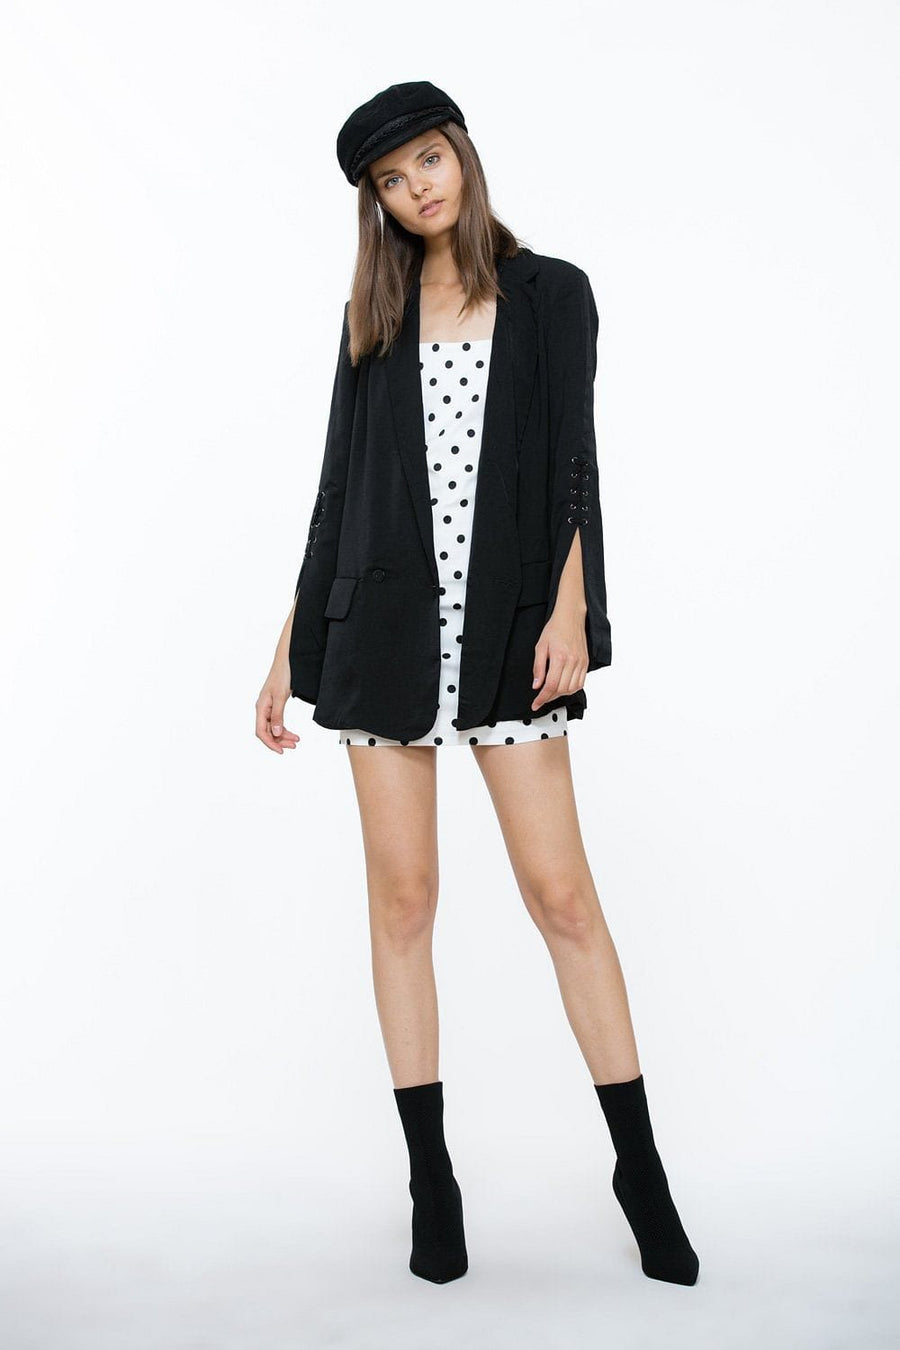 Lace Up Sleeves Blazer